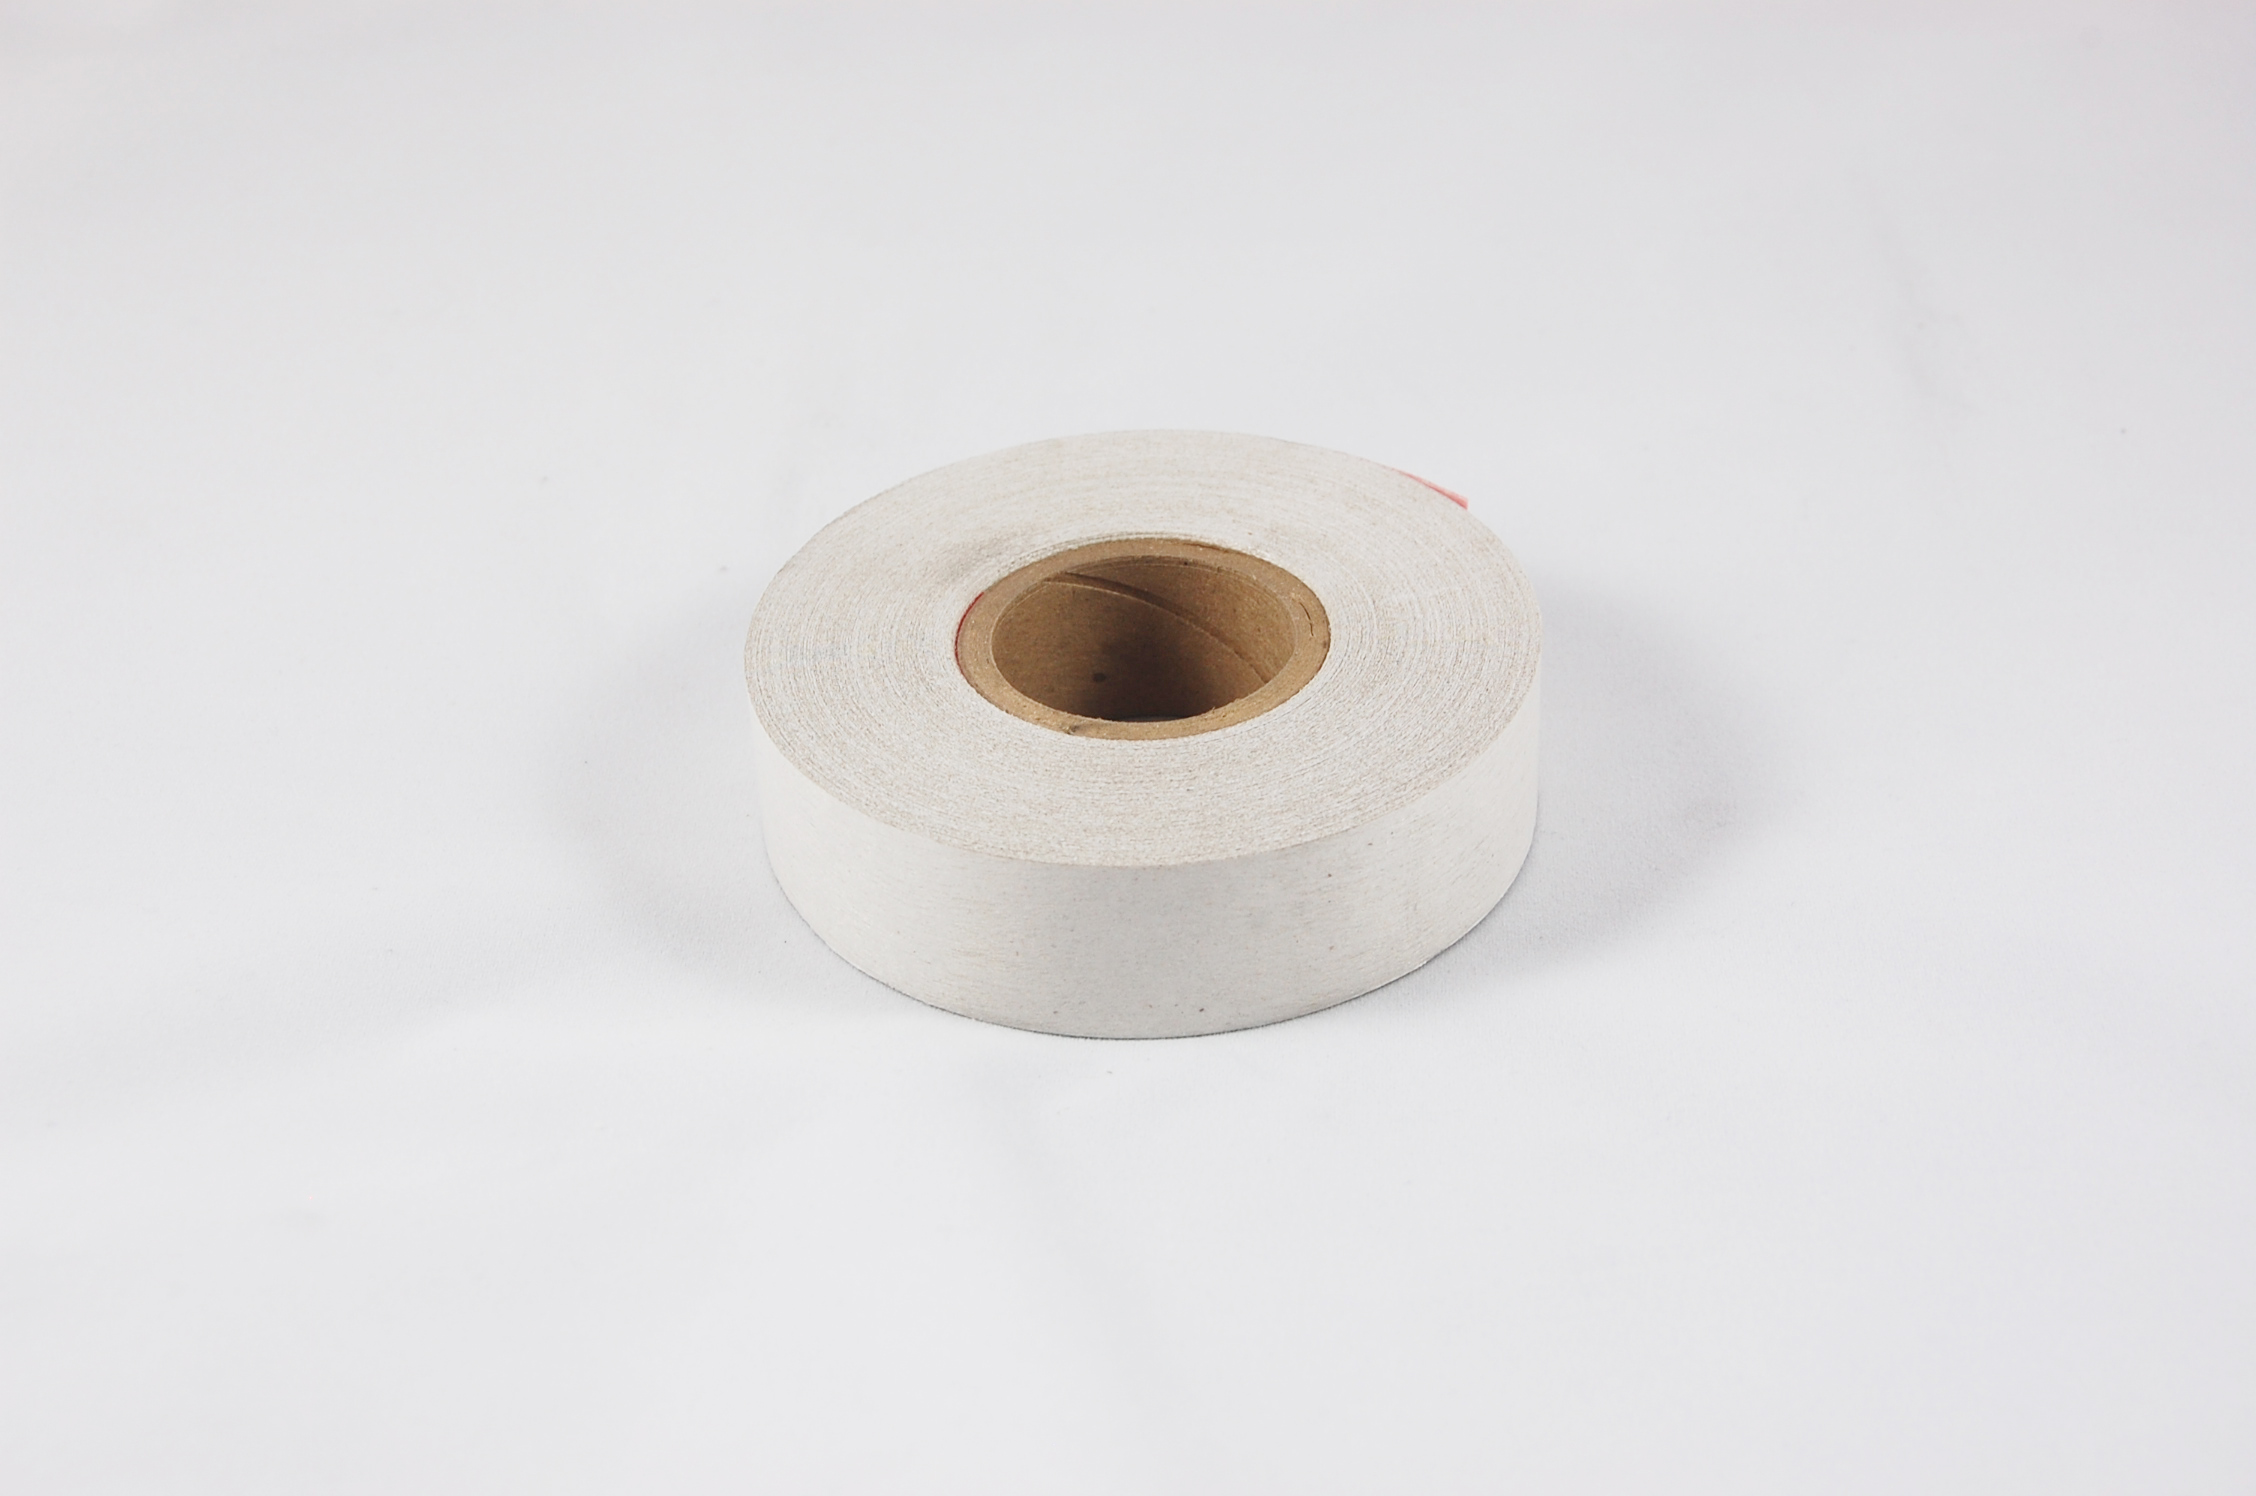 3/4" Mica Mat 7.5 Mil 77944 Epoxy-Bonded Mica Tape 155°C, natural, 3/4" wide x 24 YD roll